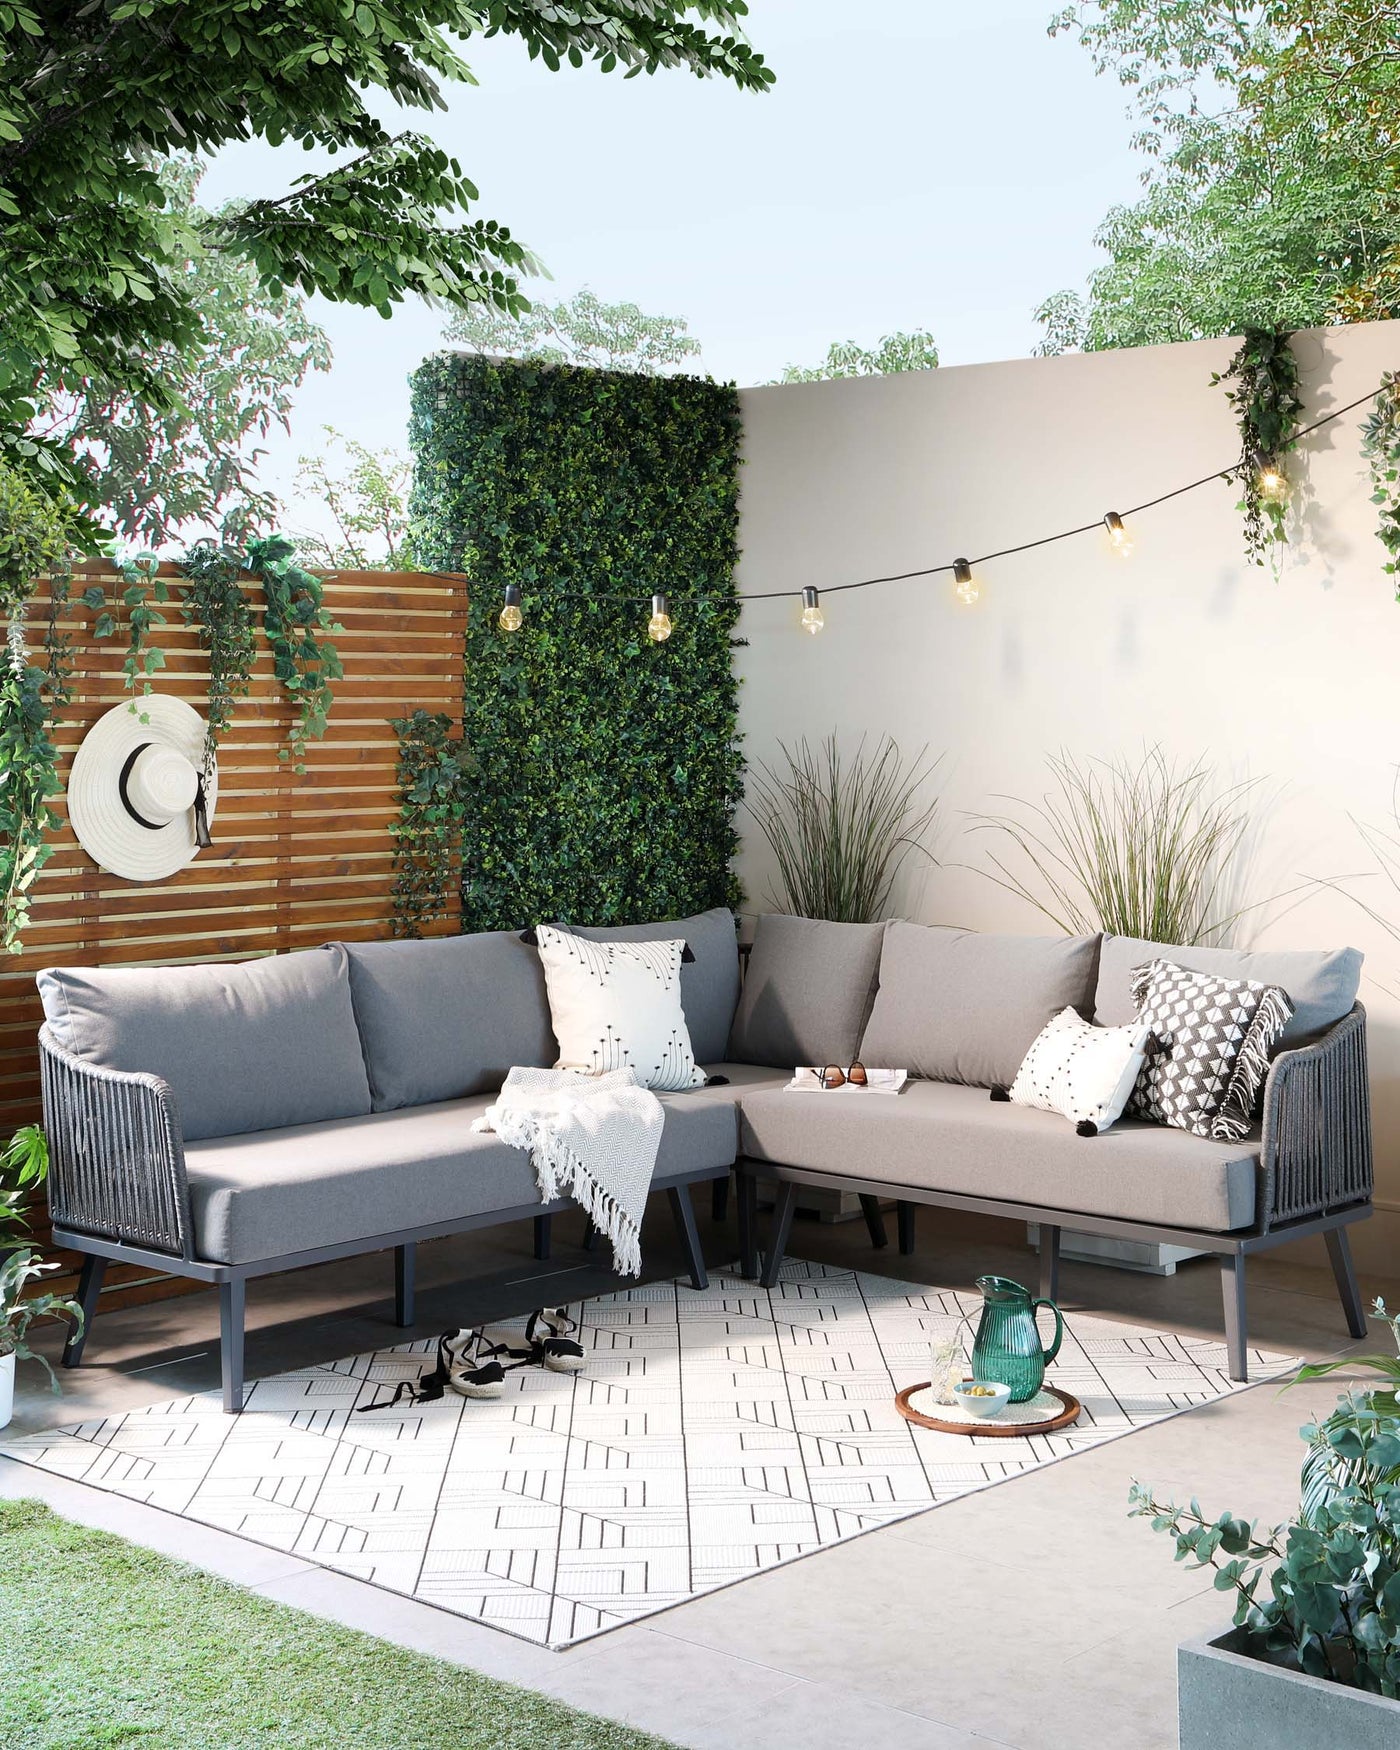 Outdoor corner lounge set with a modern design, featuring a two-piece sectional sofa with comfortable grey cushions, complemented by decorative pillows in various patterns, and a matching low-profile coffee table. The ensemble is arranged on a black and white geometric patterned area rug, enhancing the contemporary aesthetic.